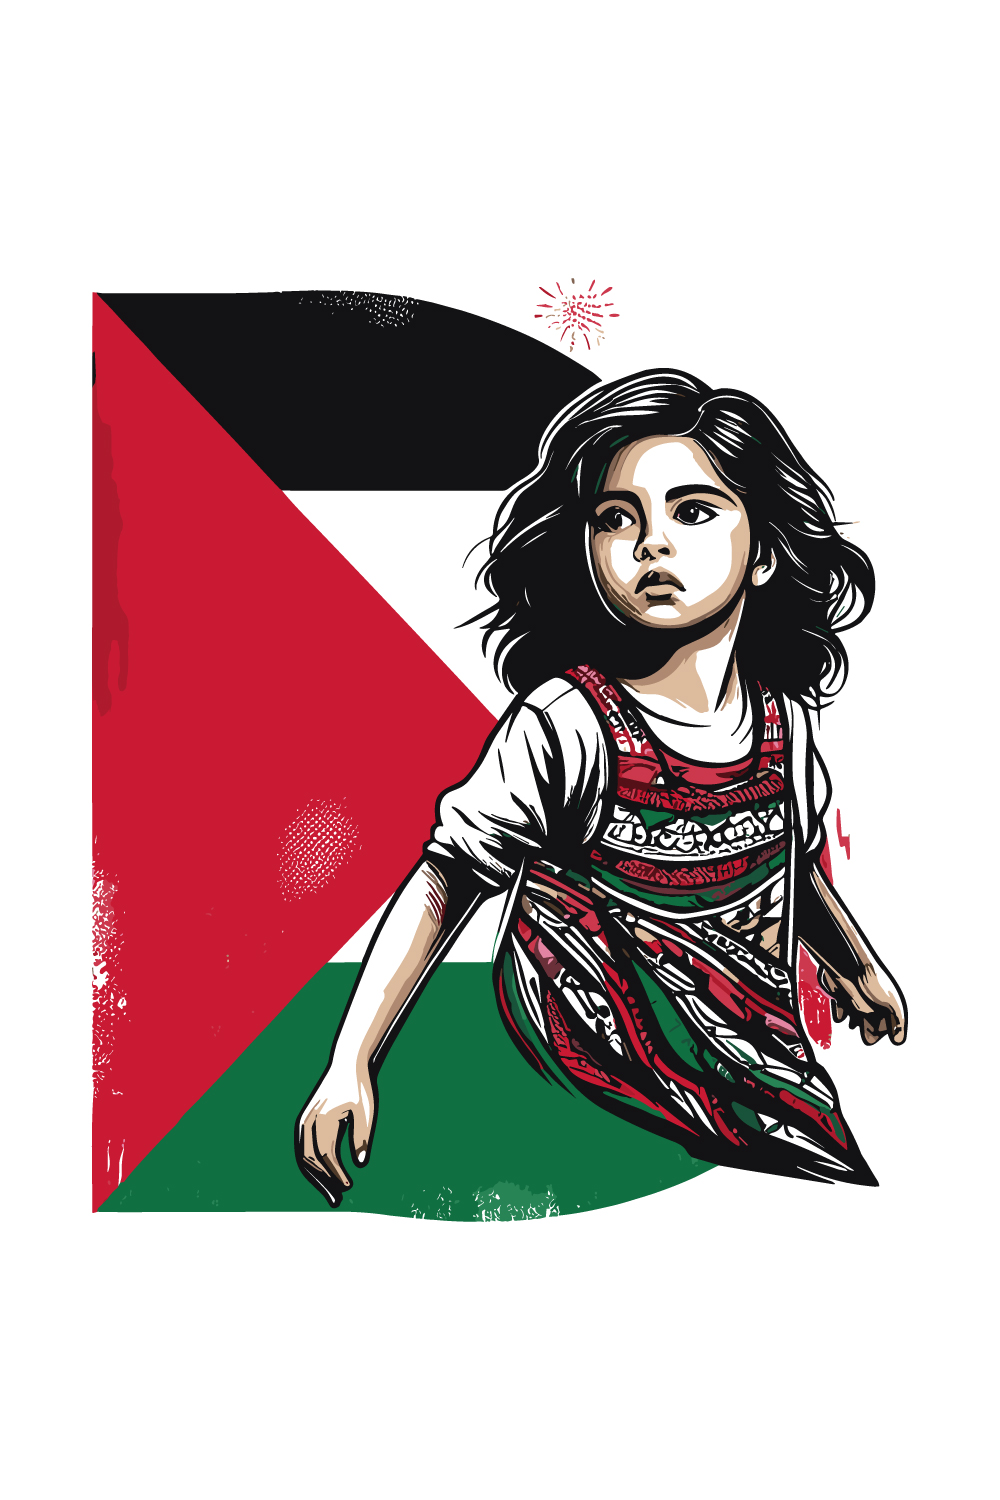 t-shirt depicting the suffering and struggle of Palestine with letter or flag pinterest preview image.